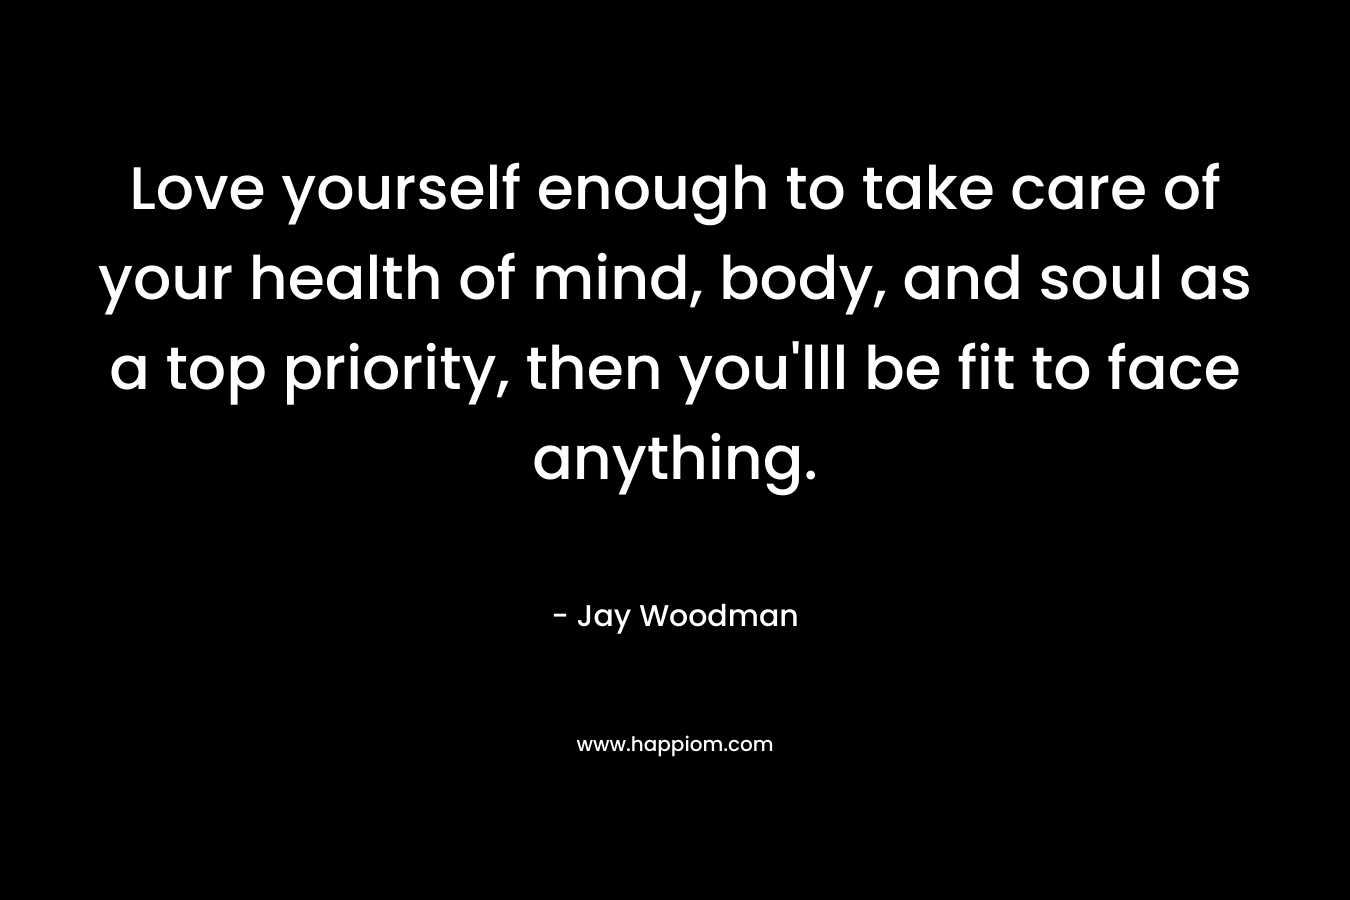 Love yourself enough to take care of your health of mind, body, and soul as a top priority, then you’lll be fit to face anything. – Jay Woodman